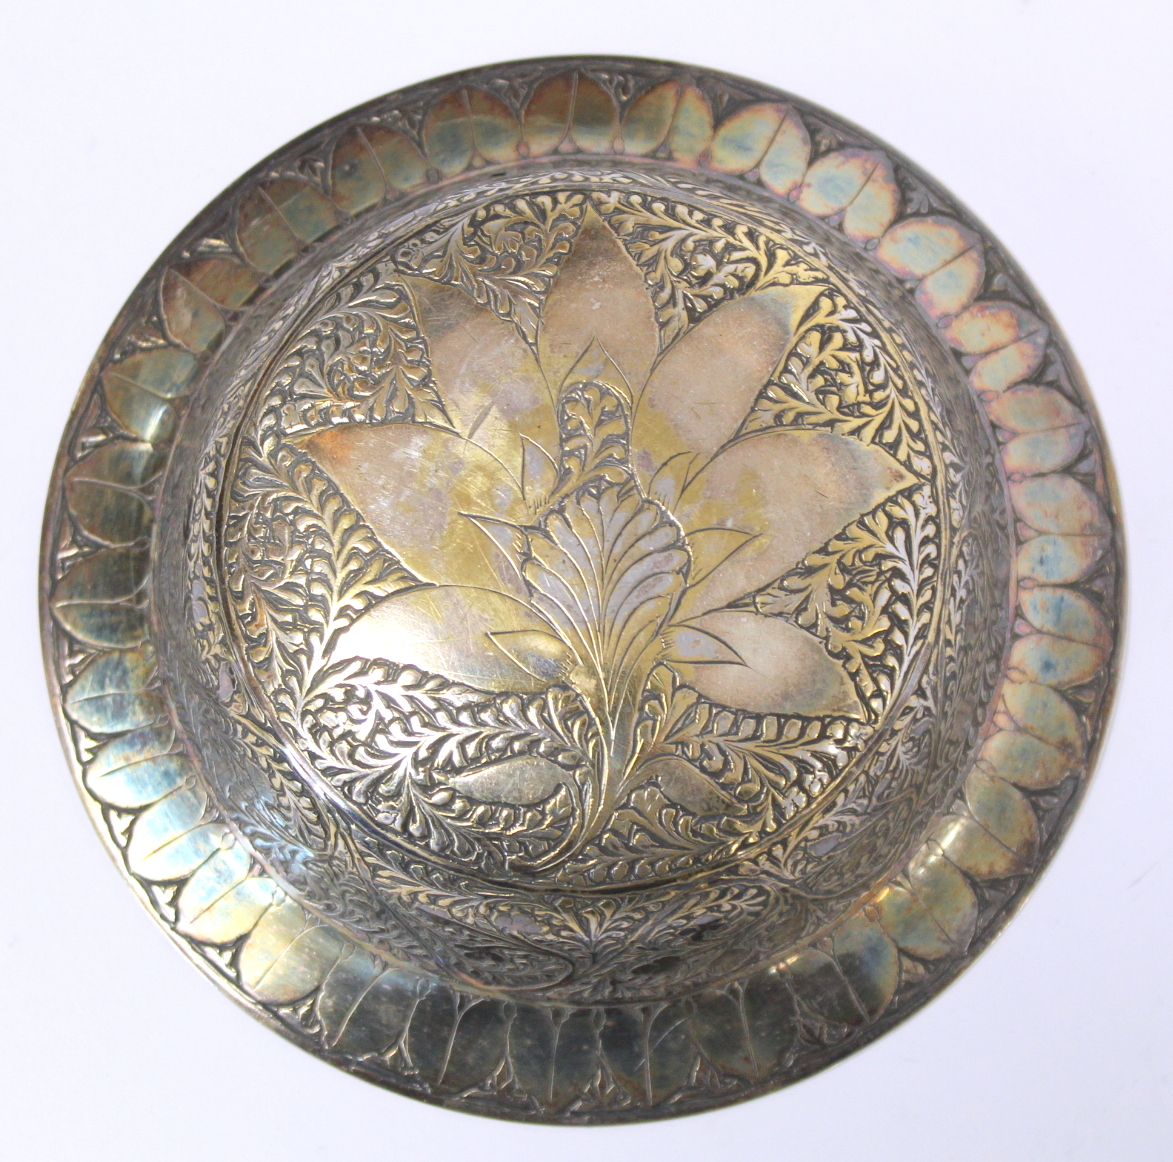 Oriental silvered circular brass bowl with engraved floral and foliate decoration, 16cm diam. - Image 7 of 9